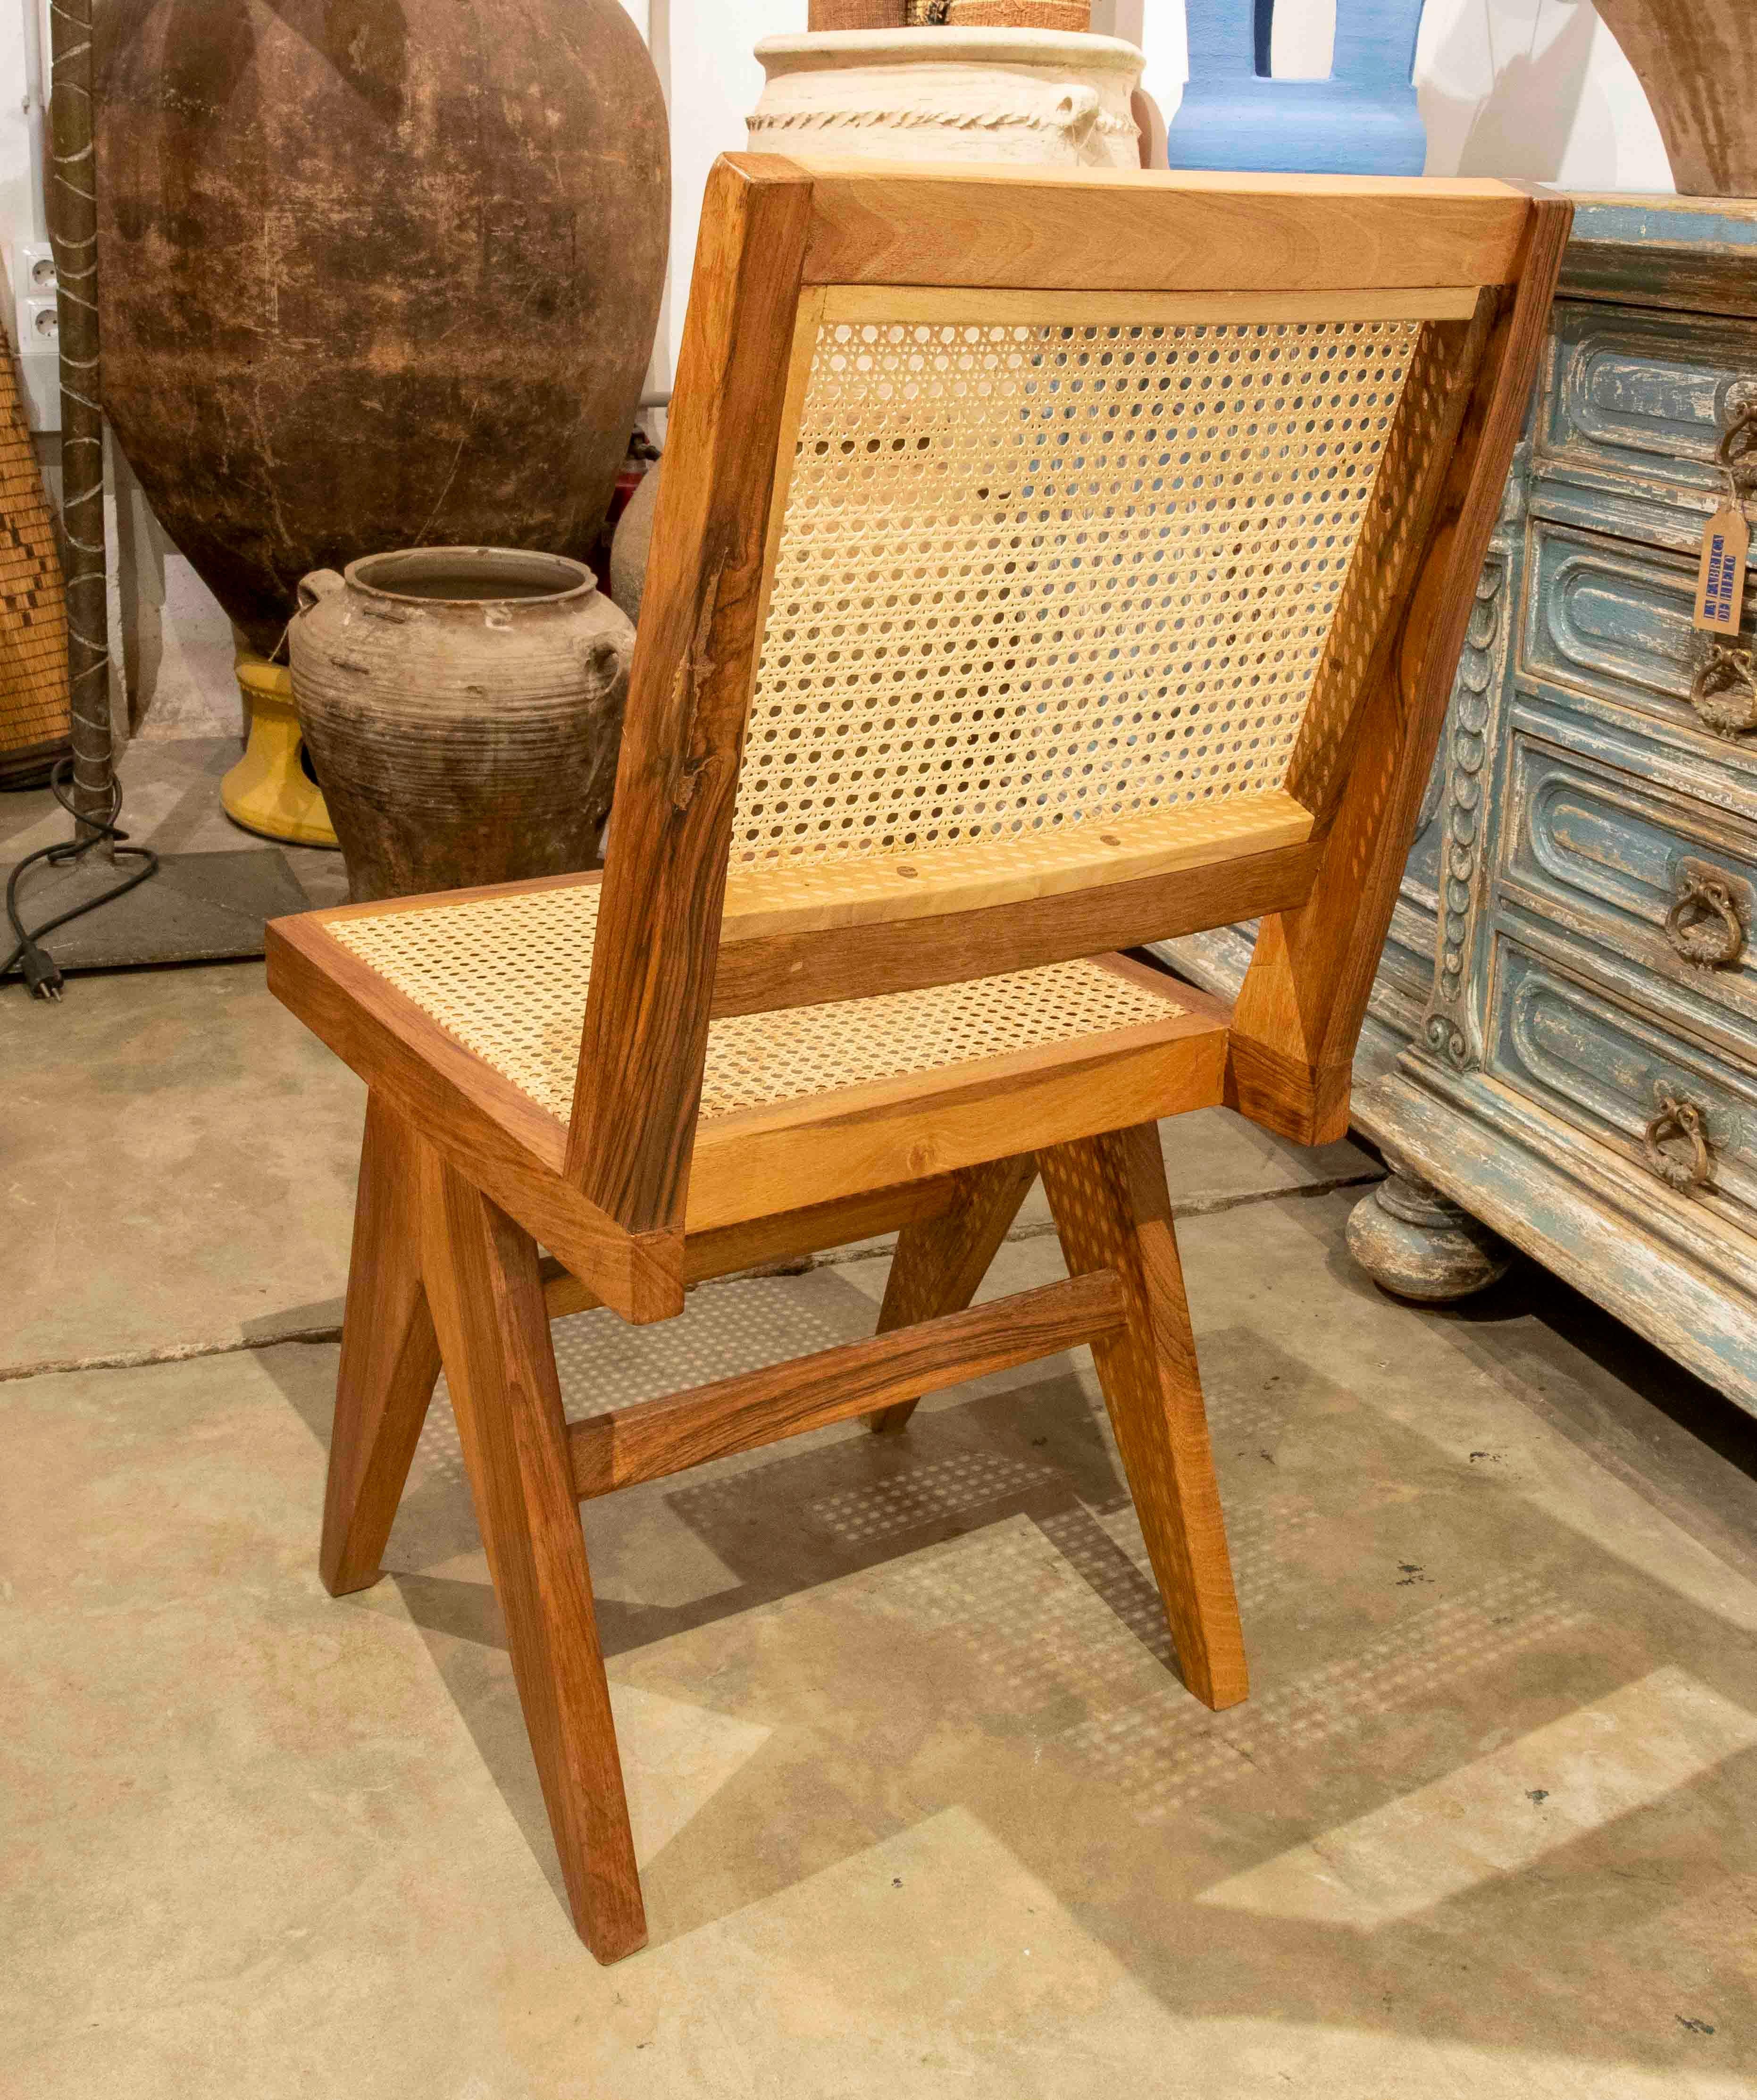 Set of Four Wooden Chairs with Wicker Grid Seat and Backrest For Sale 1